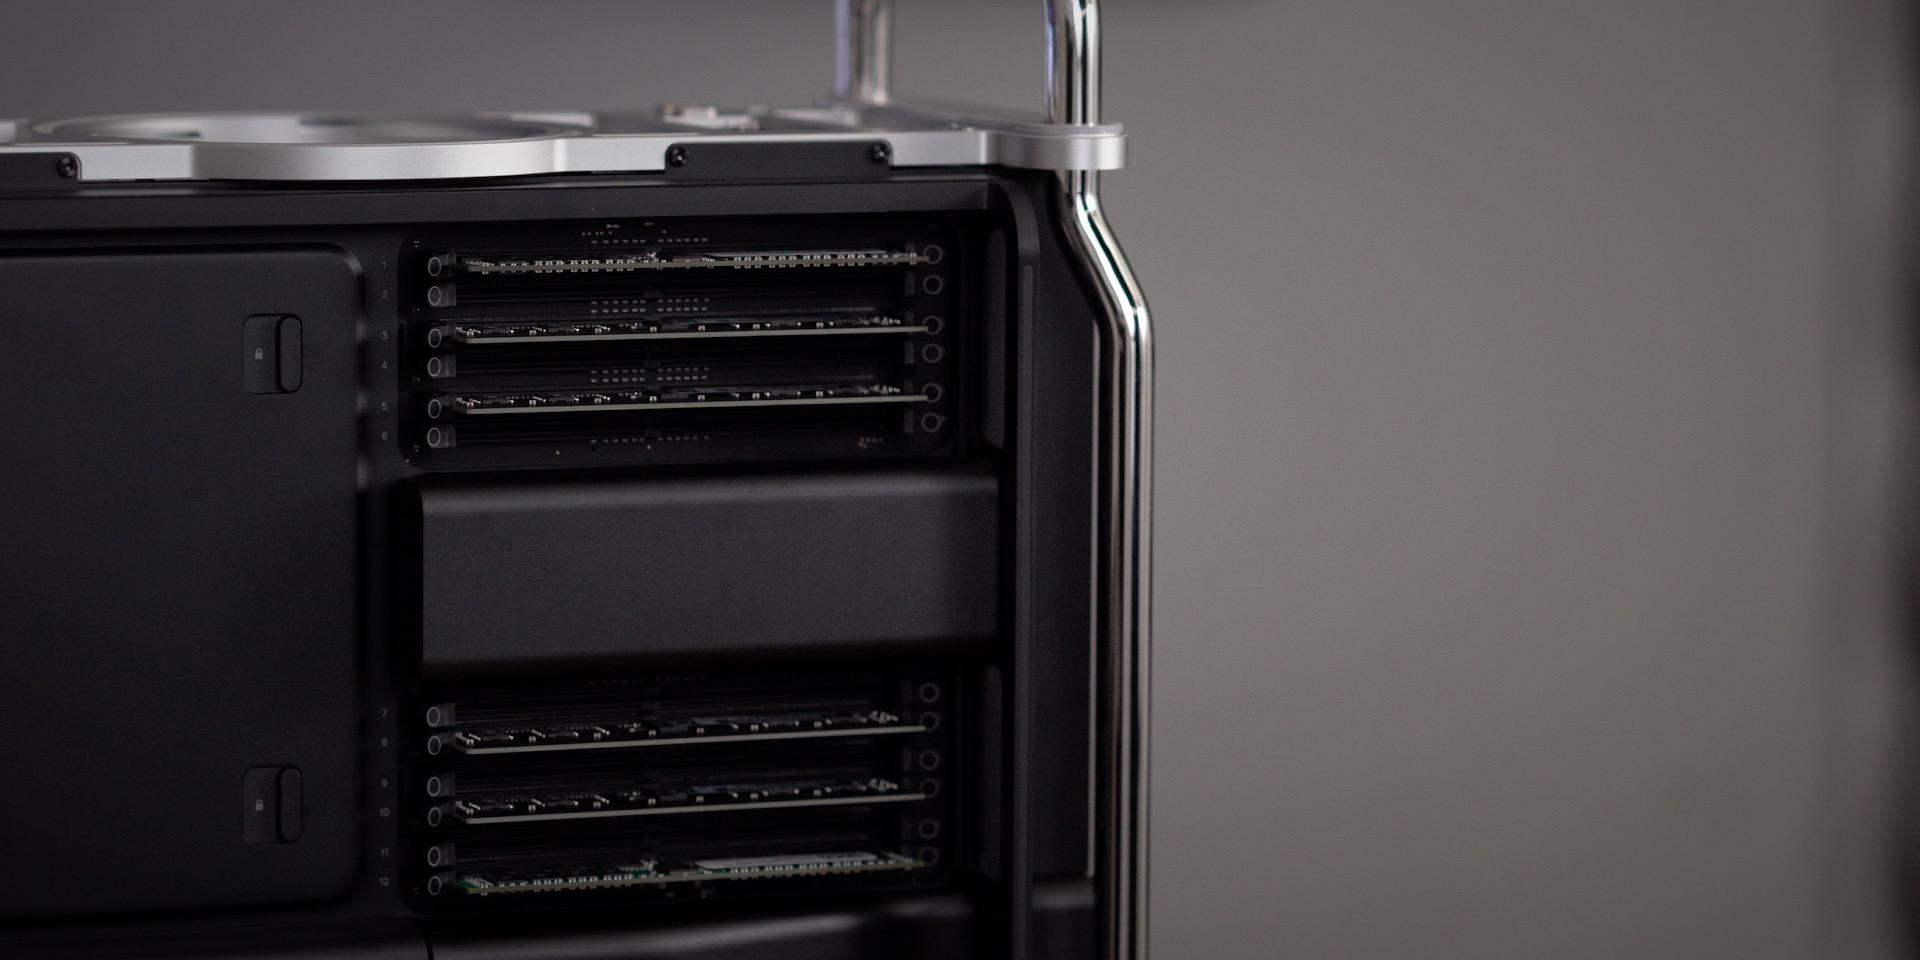 Kilde Afstemning tro på How to upgrade Mac Pro RAM and save lots of money [Video] - 9to5Mac